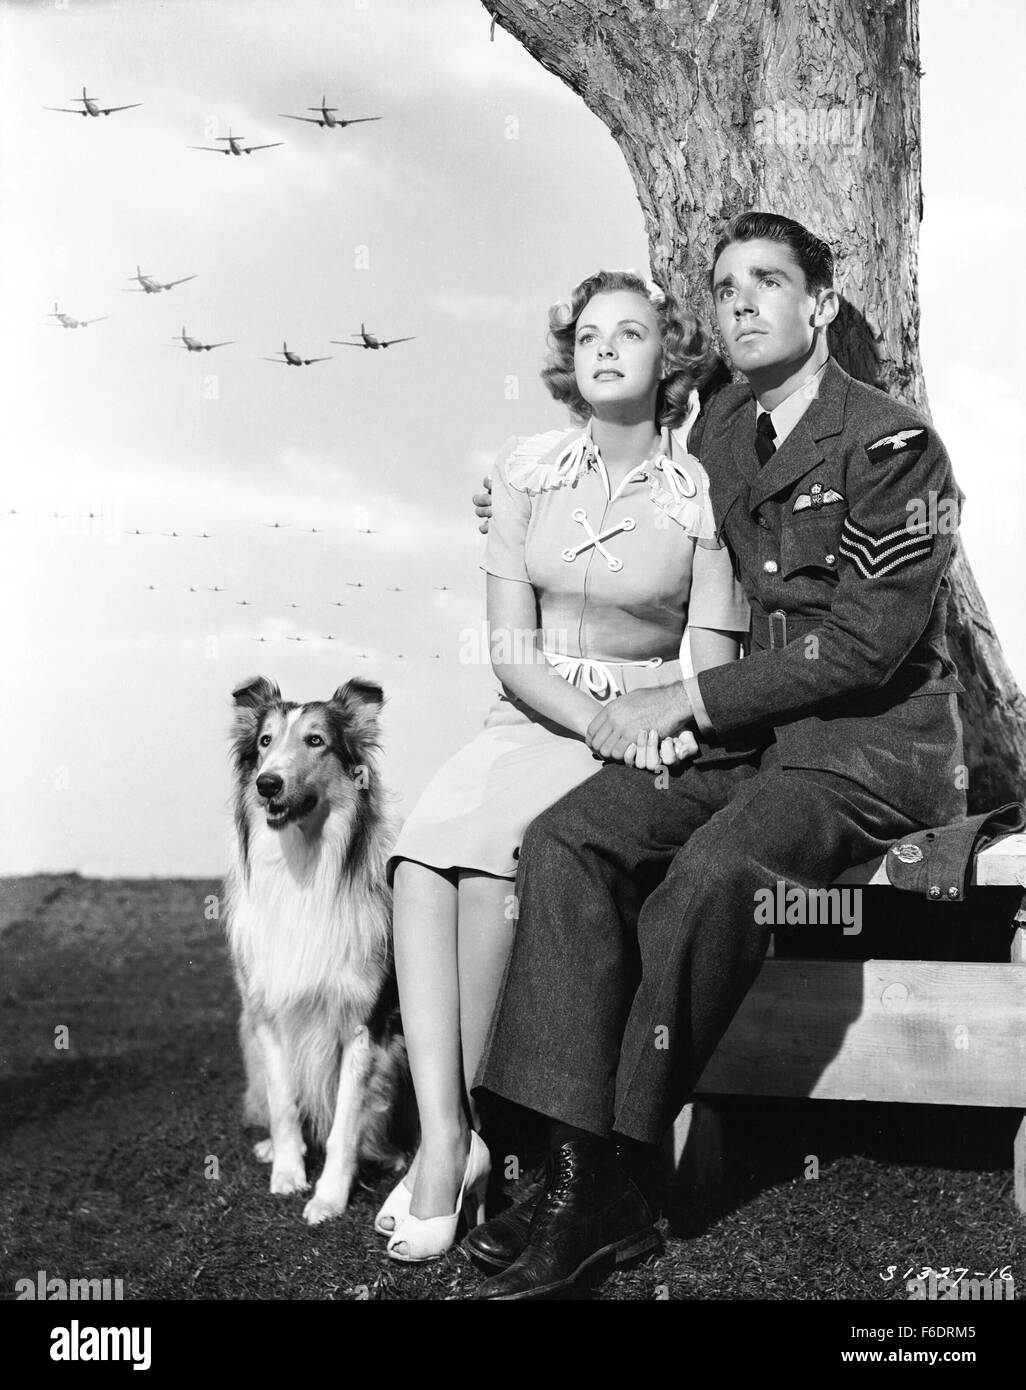 RELEASE DATE: April 20, 1945. MOVIE TITLE: Son of Lassie. STUDIO: Metro-Goldwyn-Mayer (MGM). PLOT: . PICTURED: LASSIE as Lassie, PETER LAWFORD as Joe Carraclough and JUNE LOCKHART as Priscilla. Stock Photo